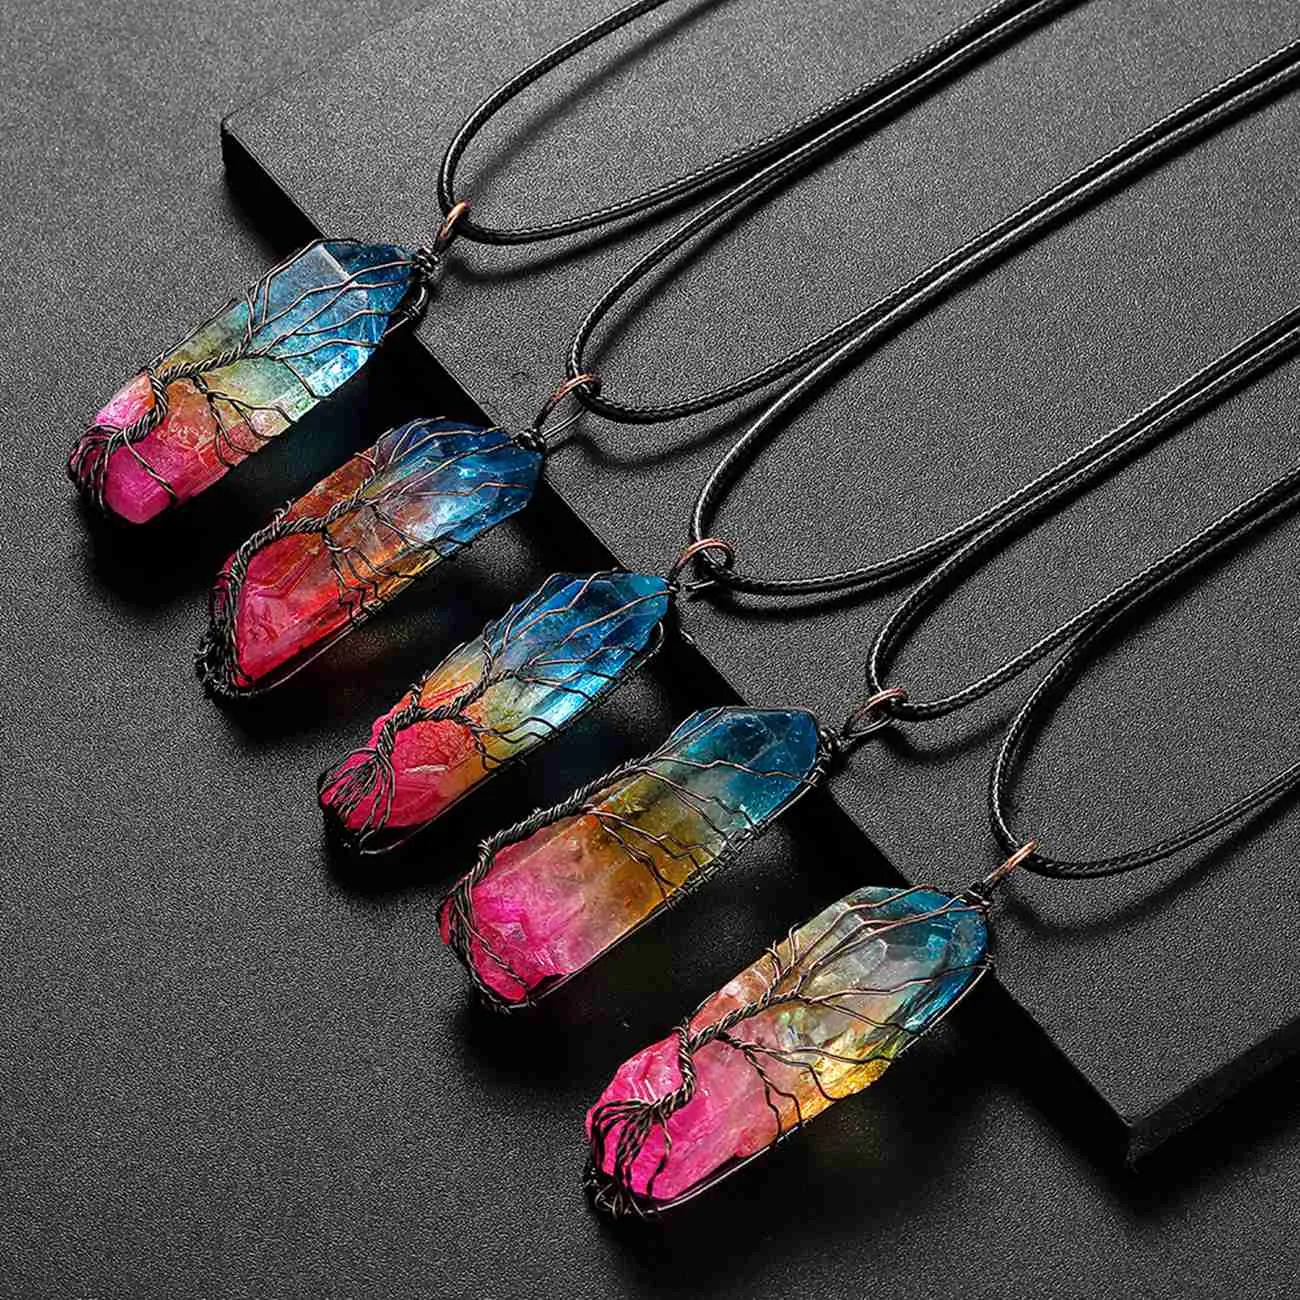 Tree of Life Titanium Coated Rainbow Rock Quartz Chakra Crystal Necklace Copper Wire Wrapped Irregular Rough Healing Pointed Gemstone Pendant Jewelry for Women Men